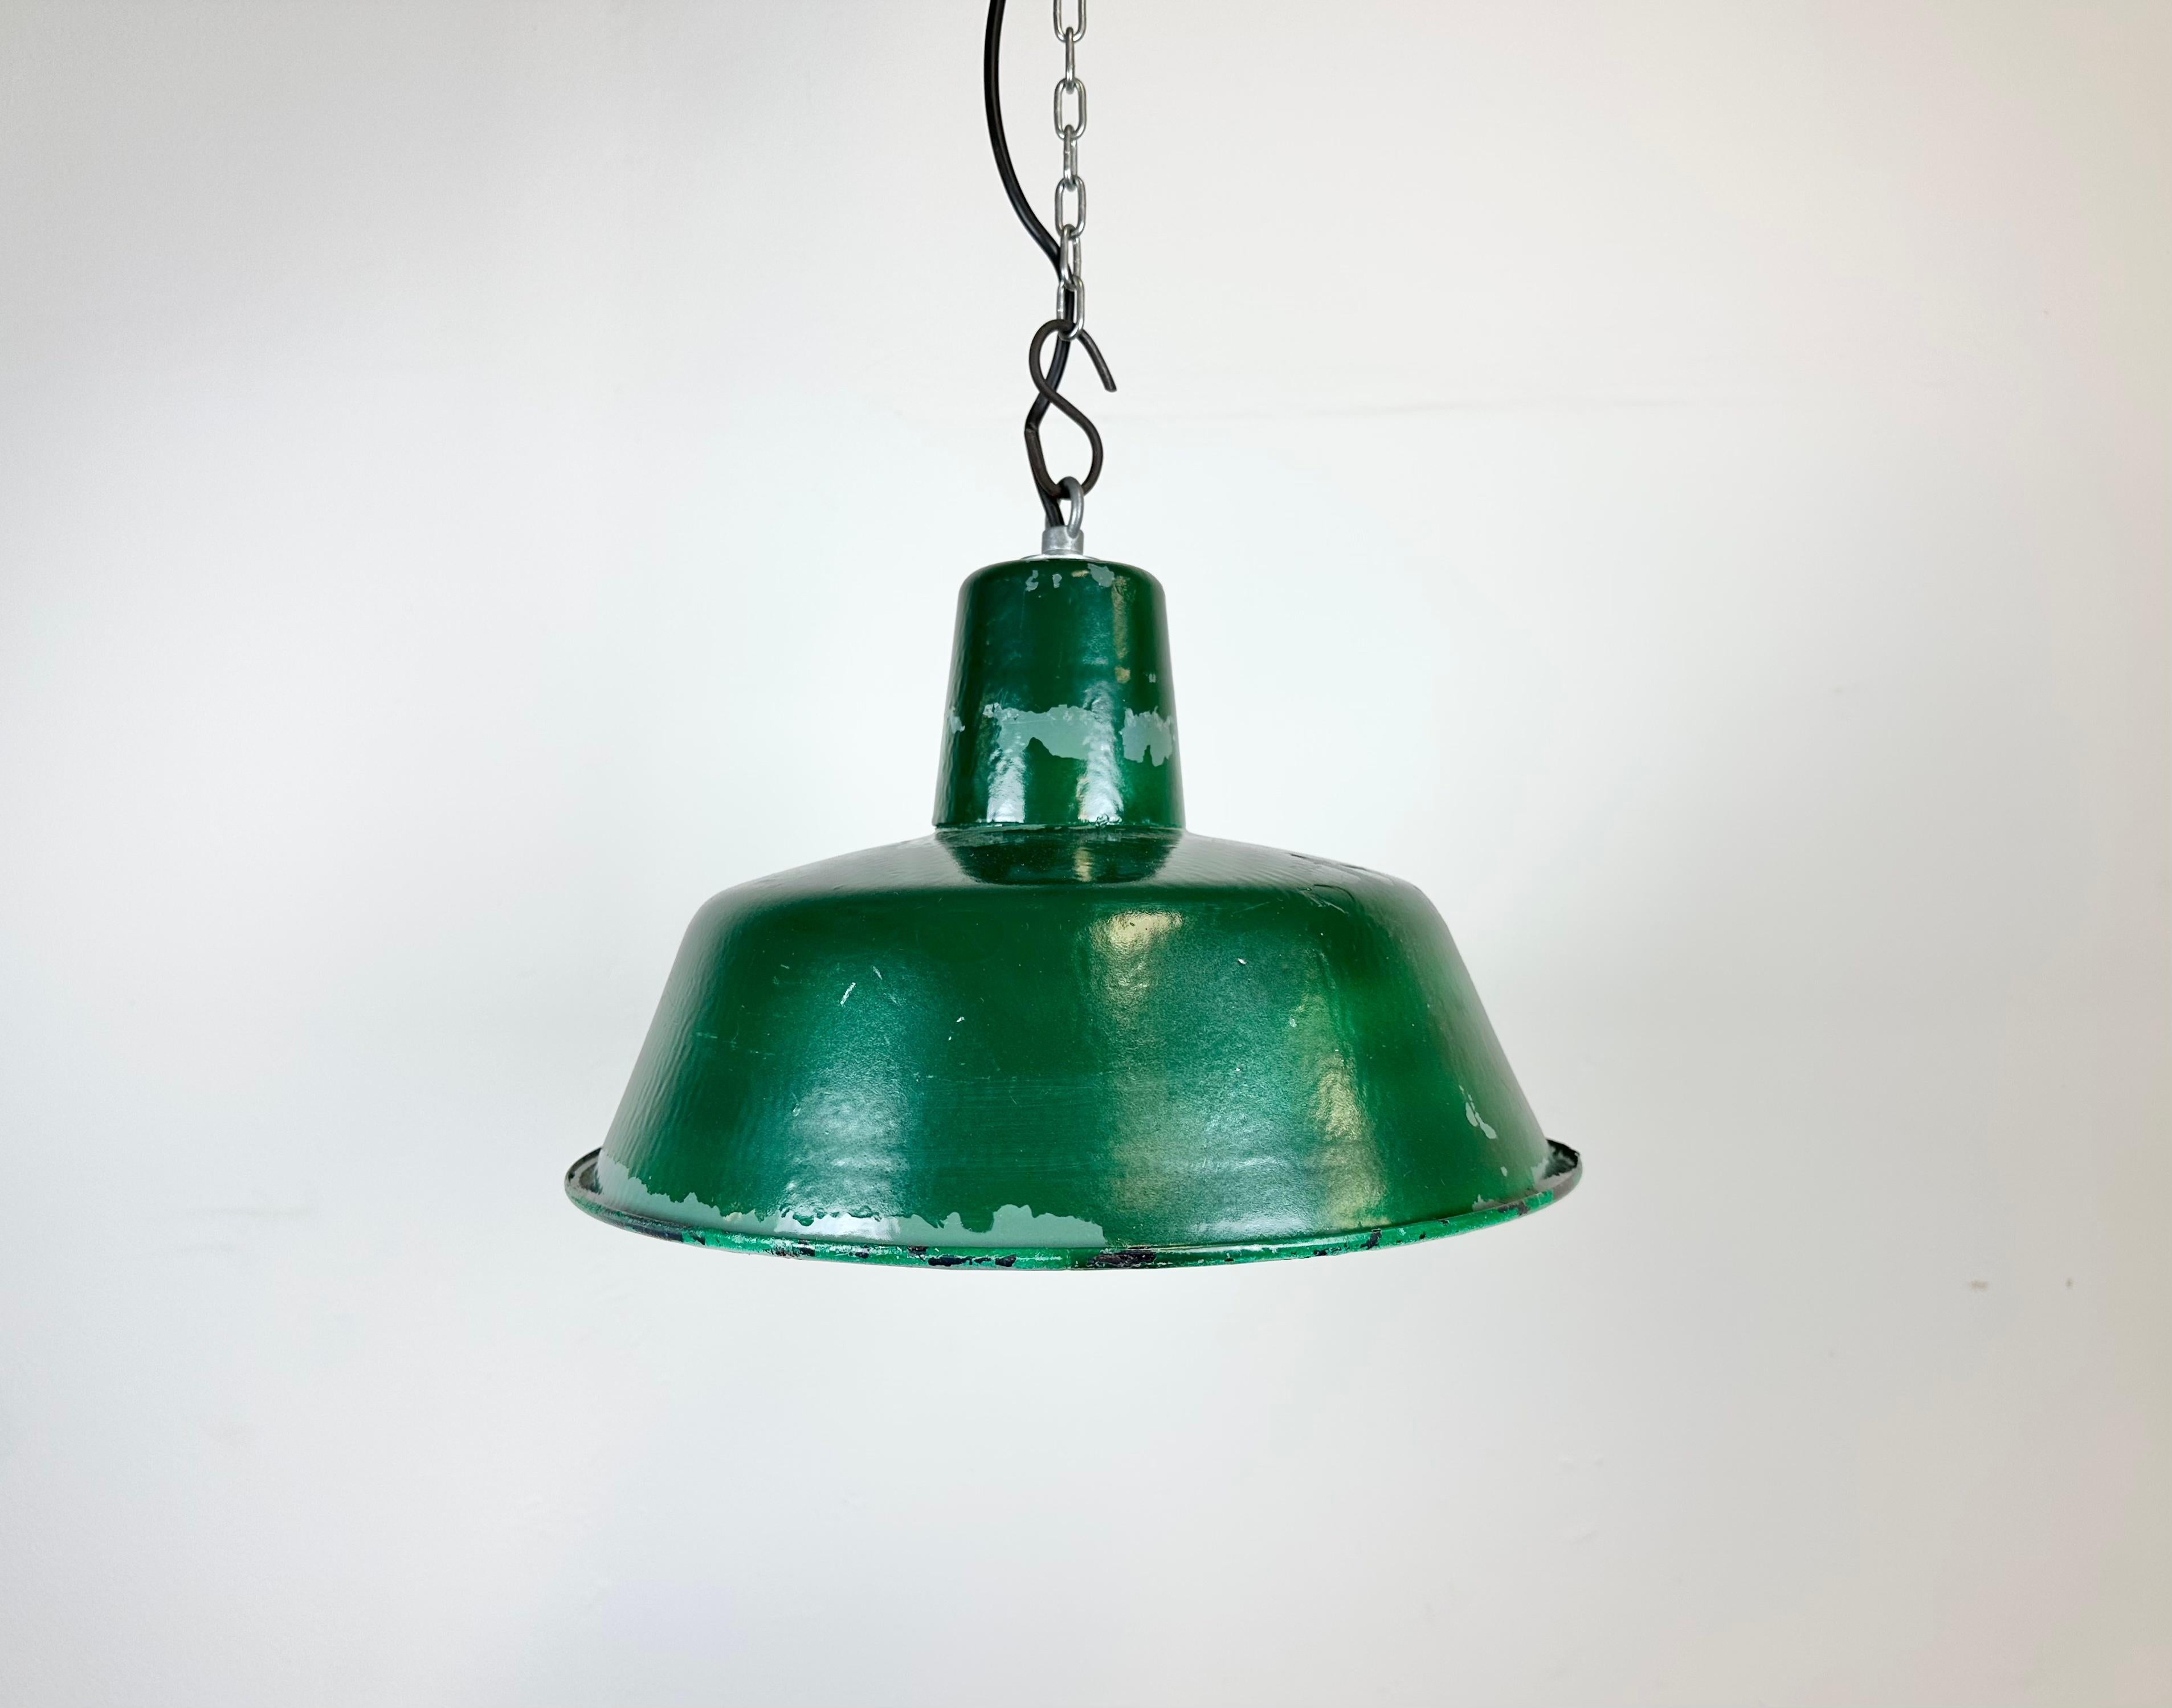 Industrial green pendant light made in Poland during the 1960s. White inside the shade. Iron top. The porcelain socket requires E 27/ E 26 light bulbs. New wire. Fully functional. The diameter of the lamp is 32 cm.The weight of the lamp is 1,2 kg.